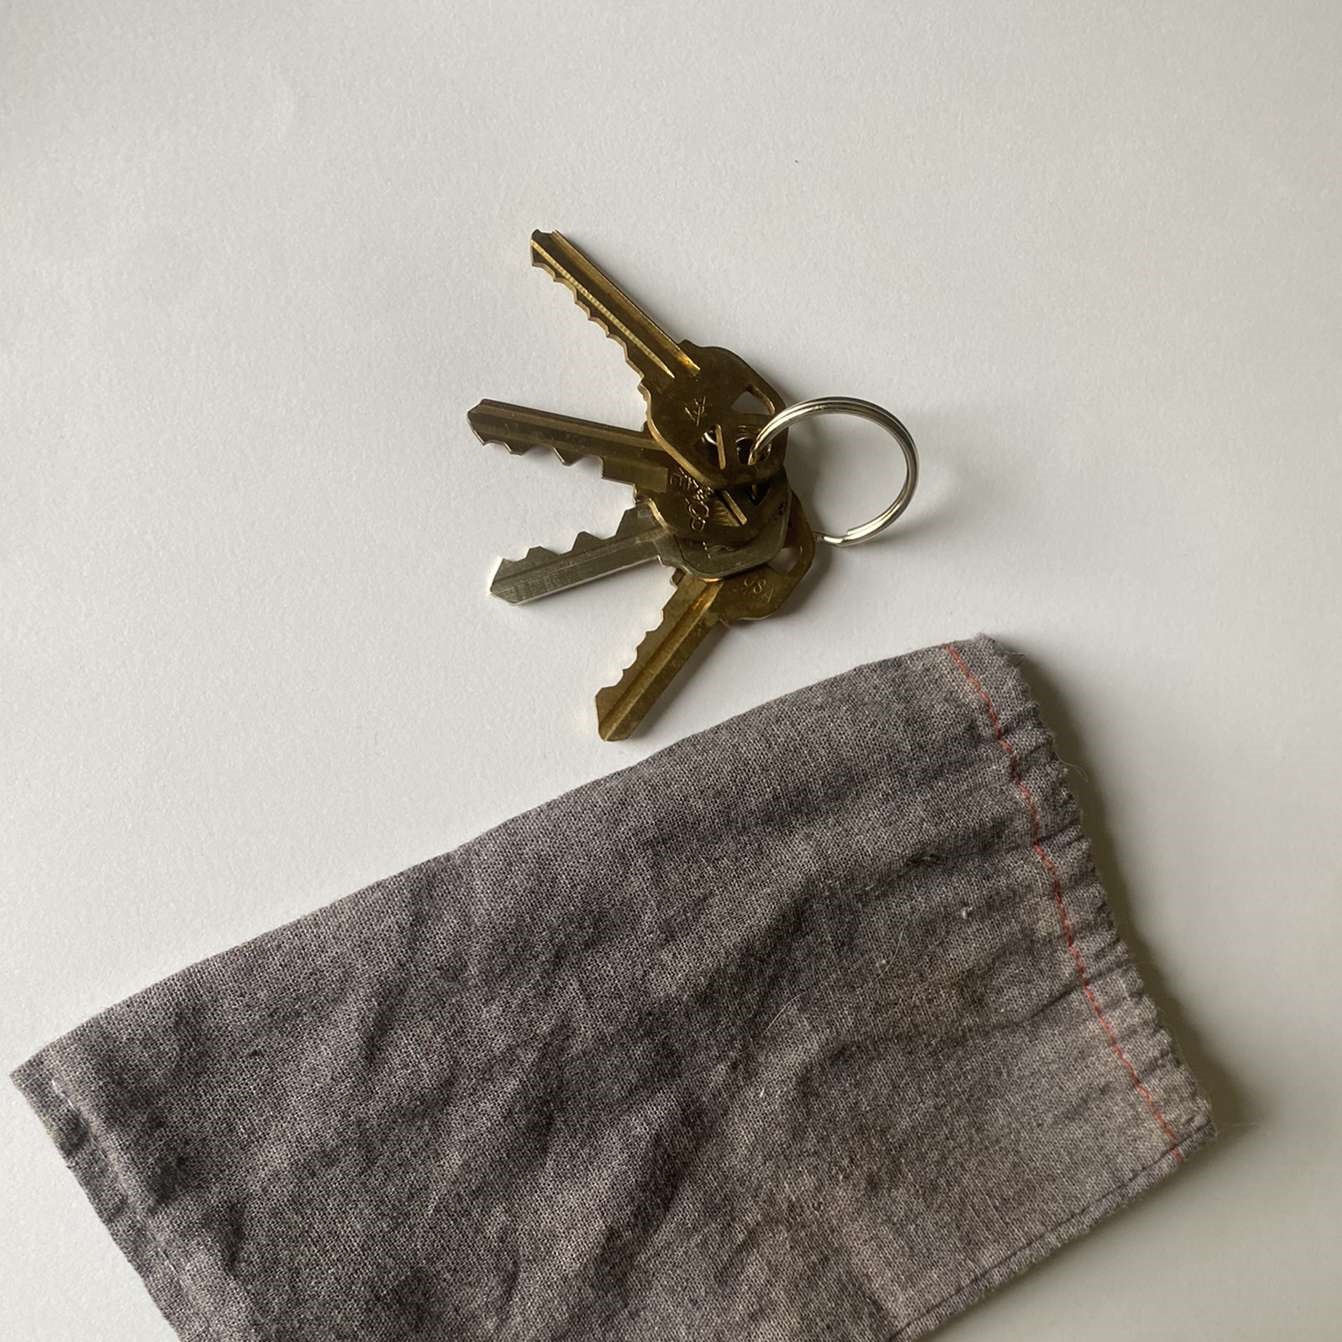 A set of four keys on a jump ring and the gray bag that they are kept in